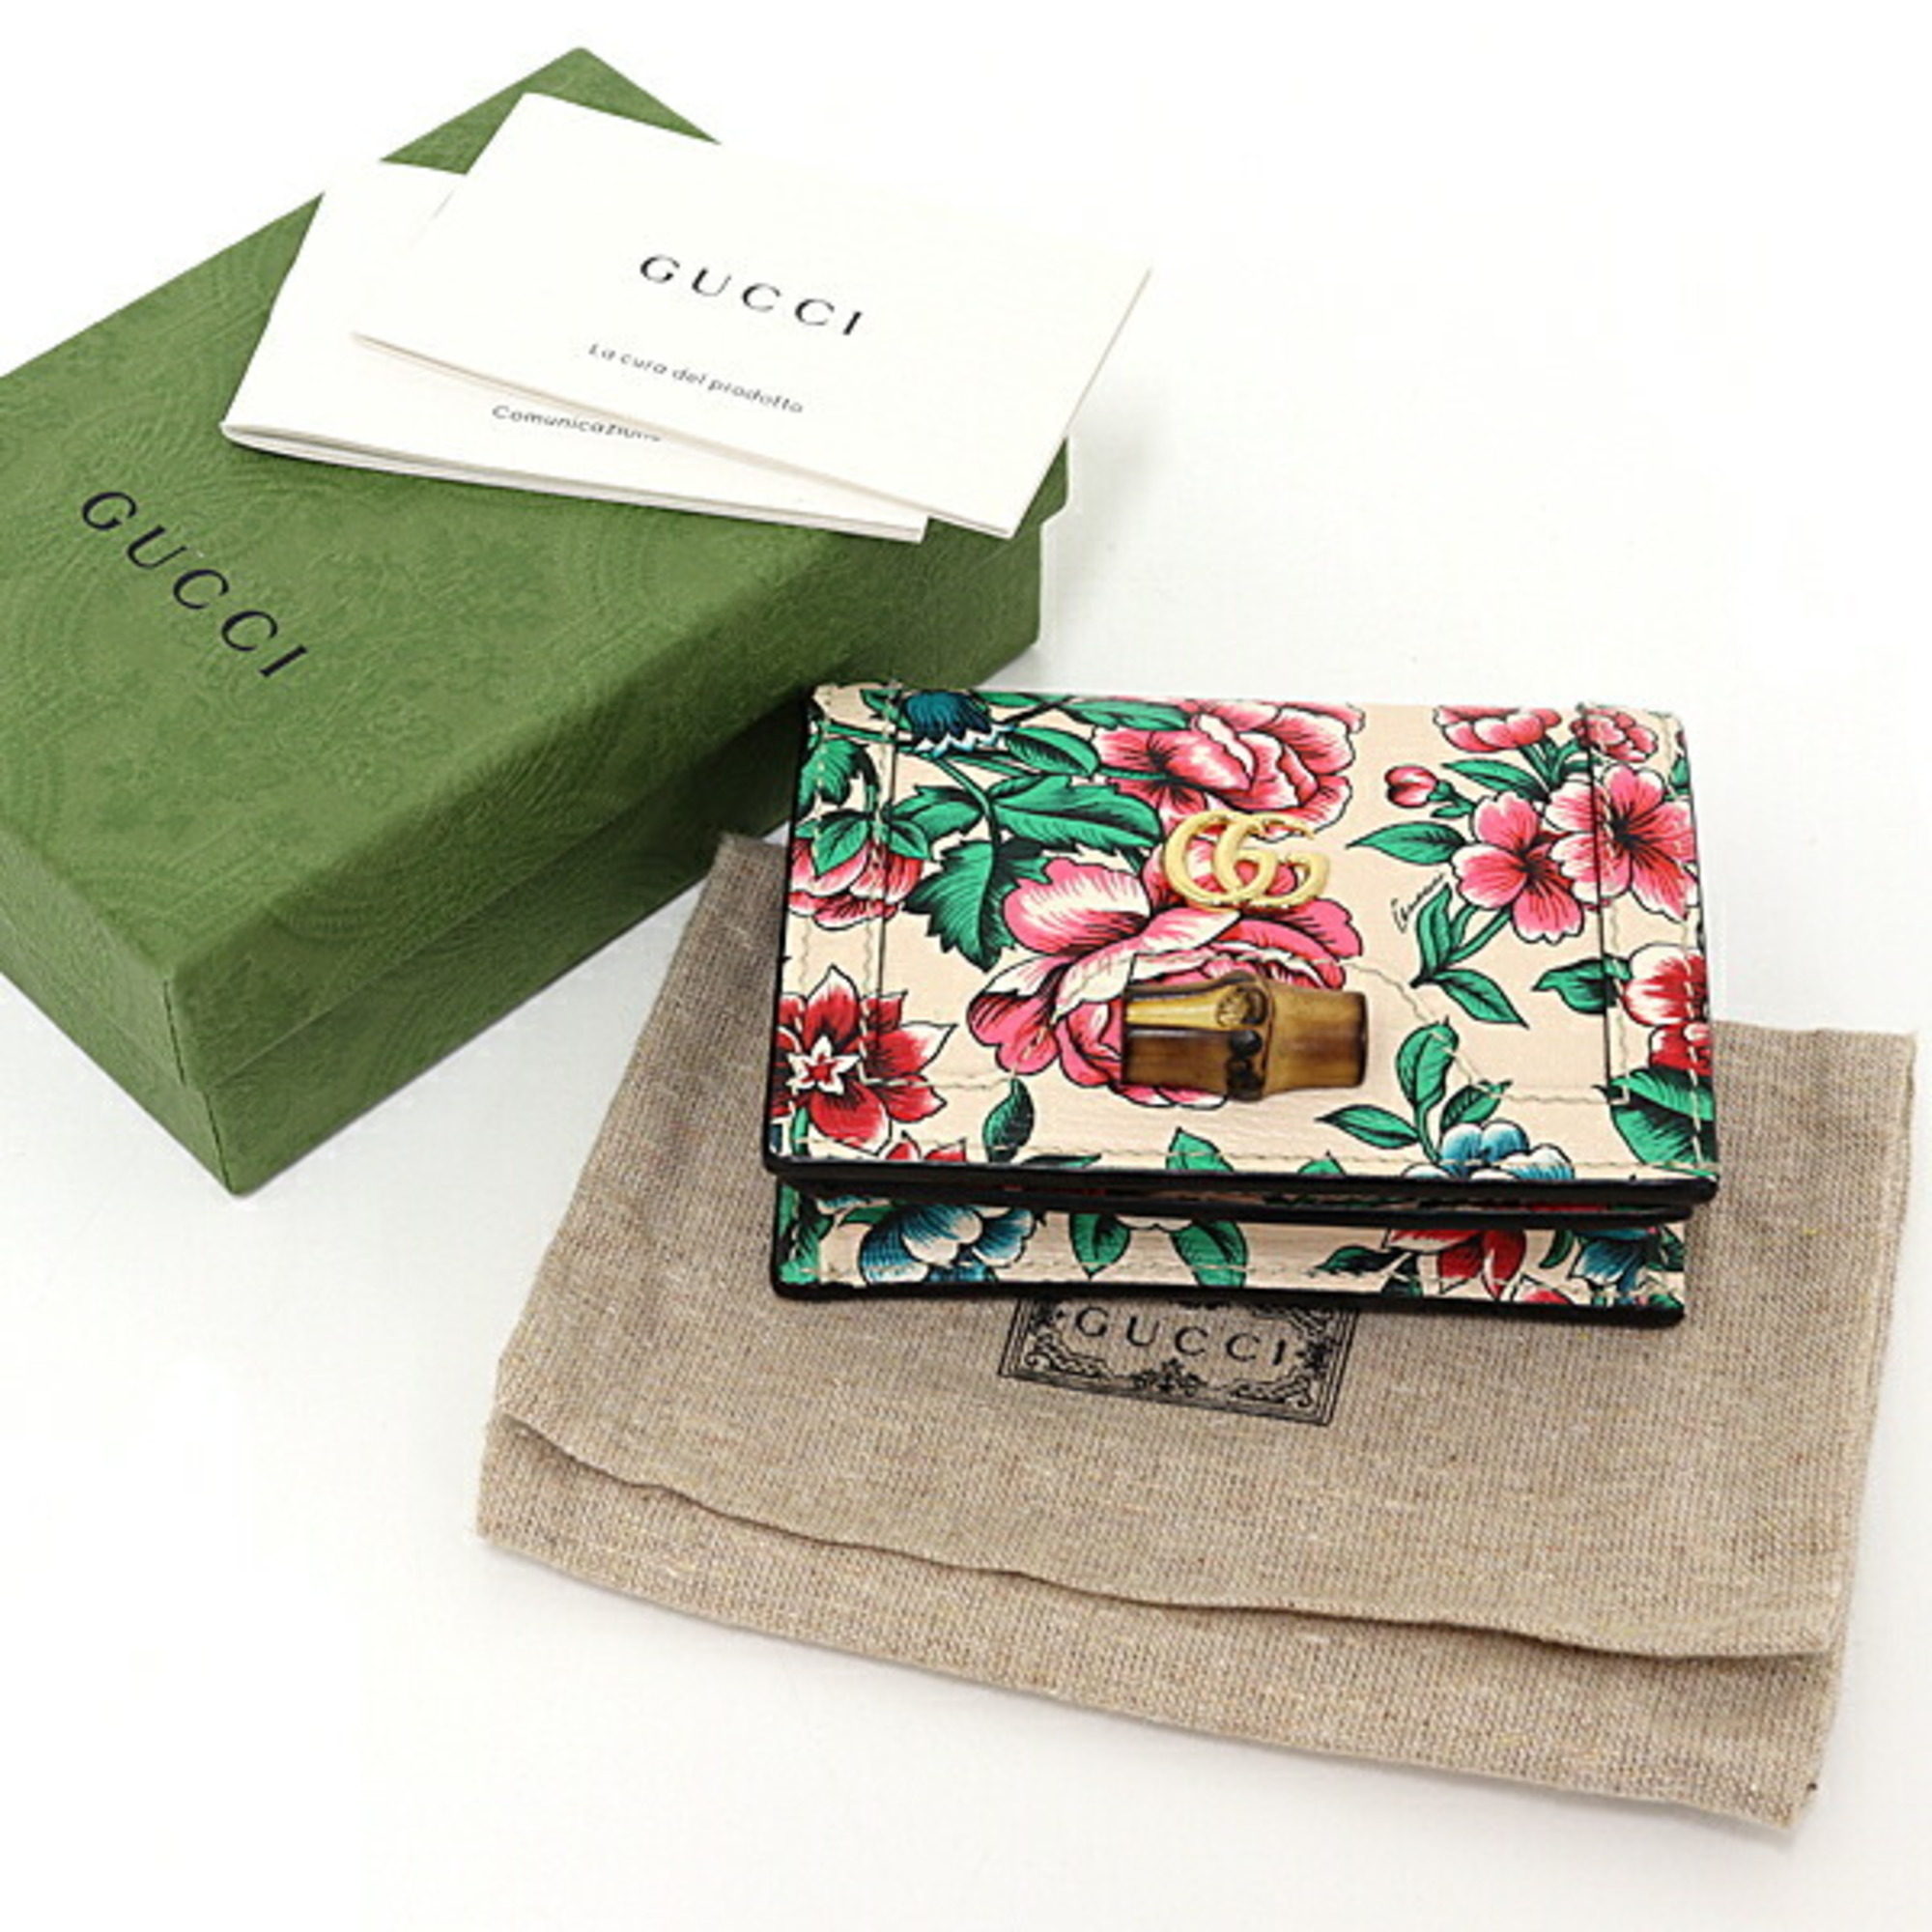 GUCCI Bamboo Card Case Wallet Bifold Flower Leather 658244 Multicolor Gold Hardware